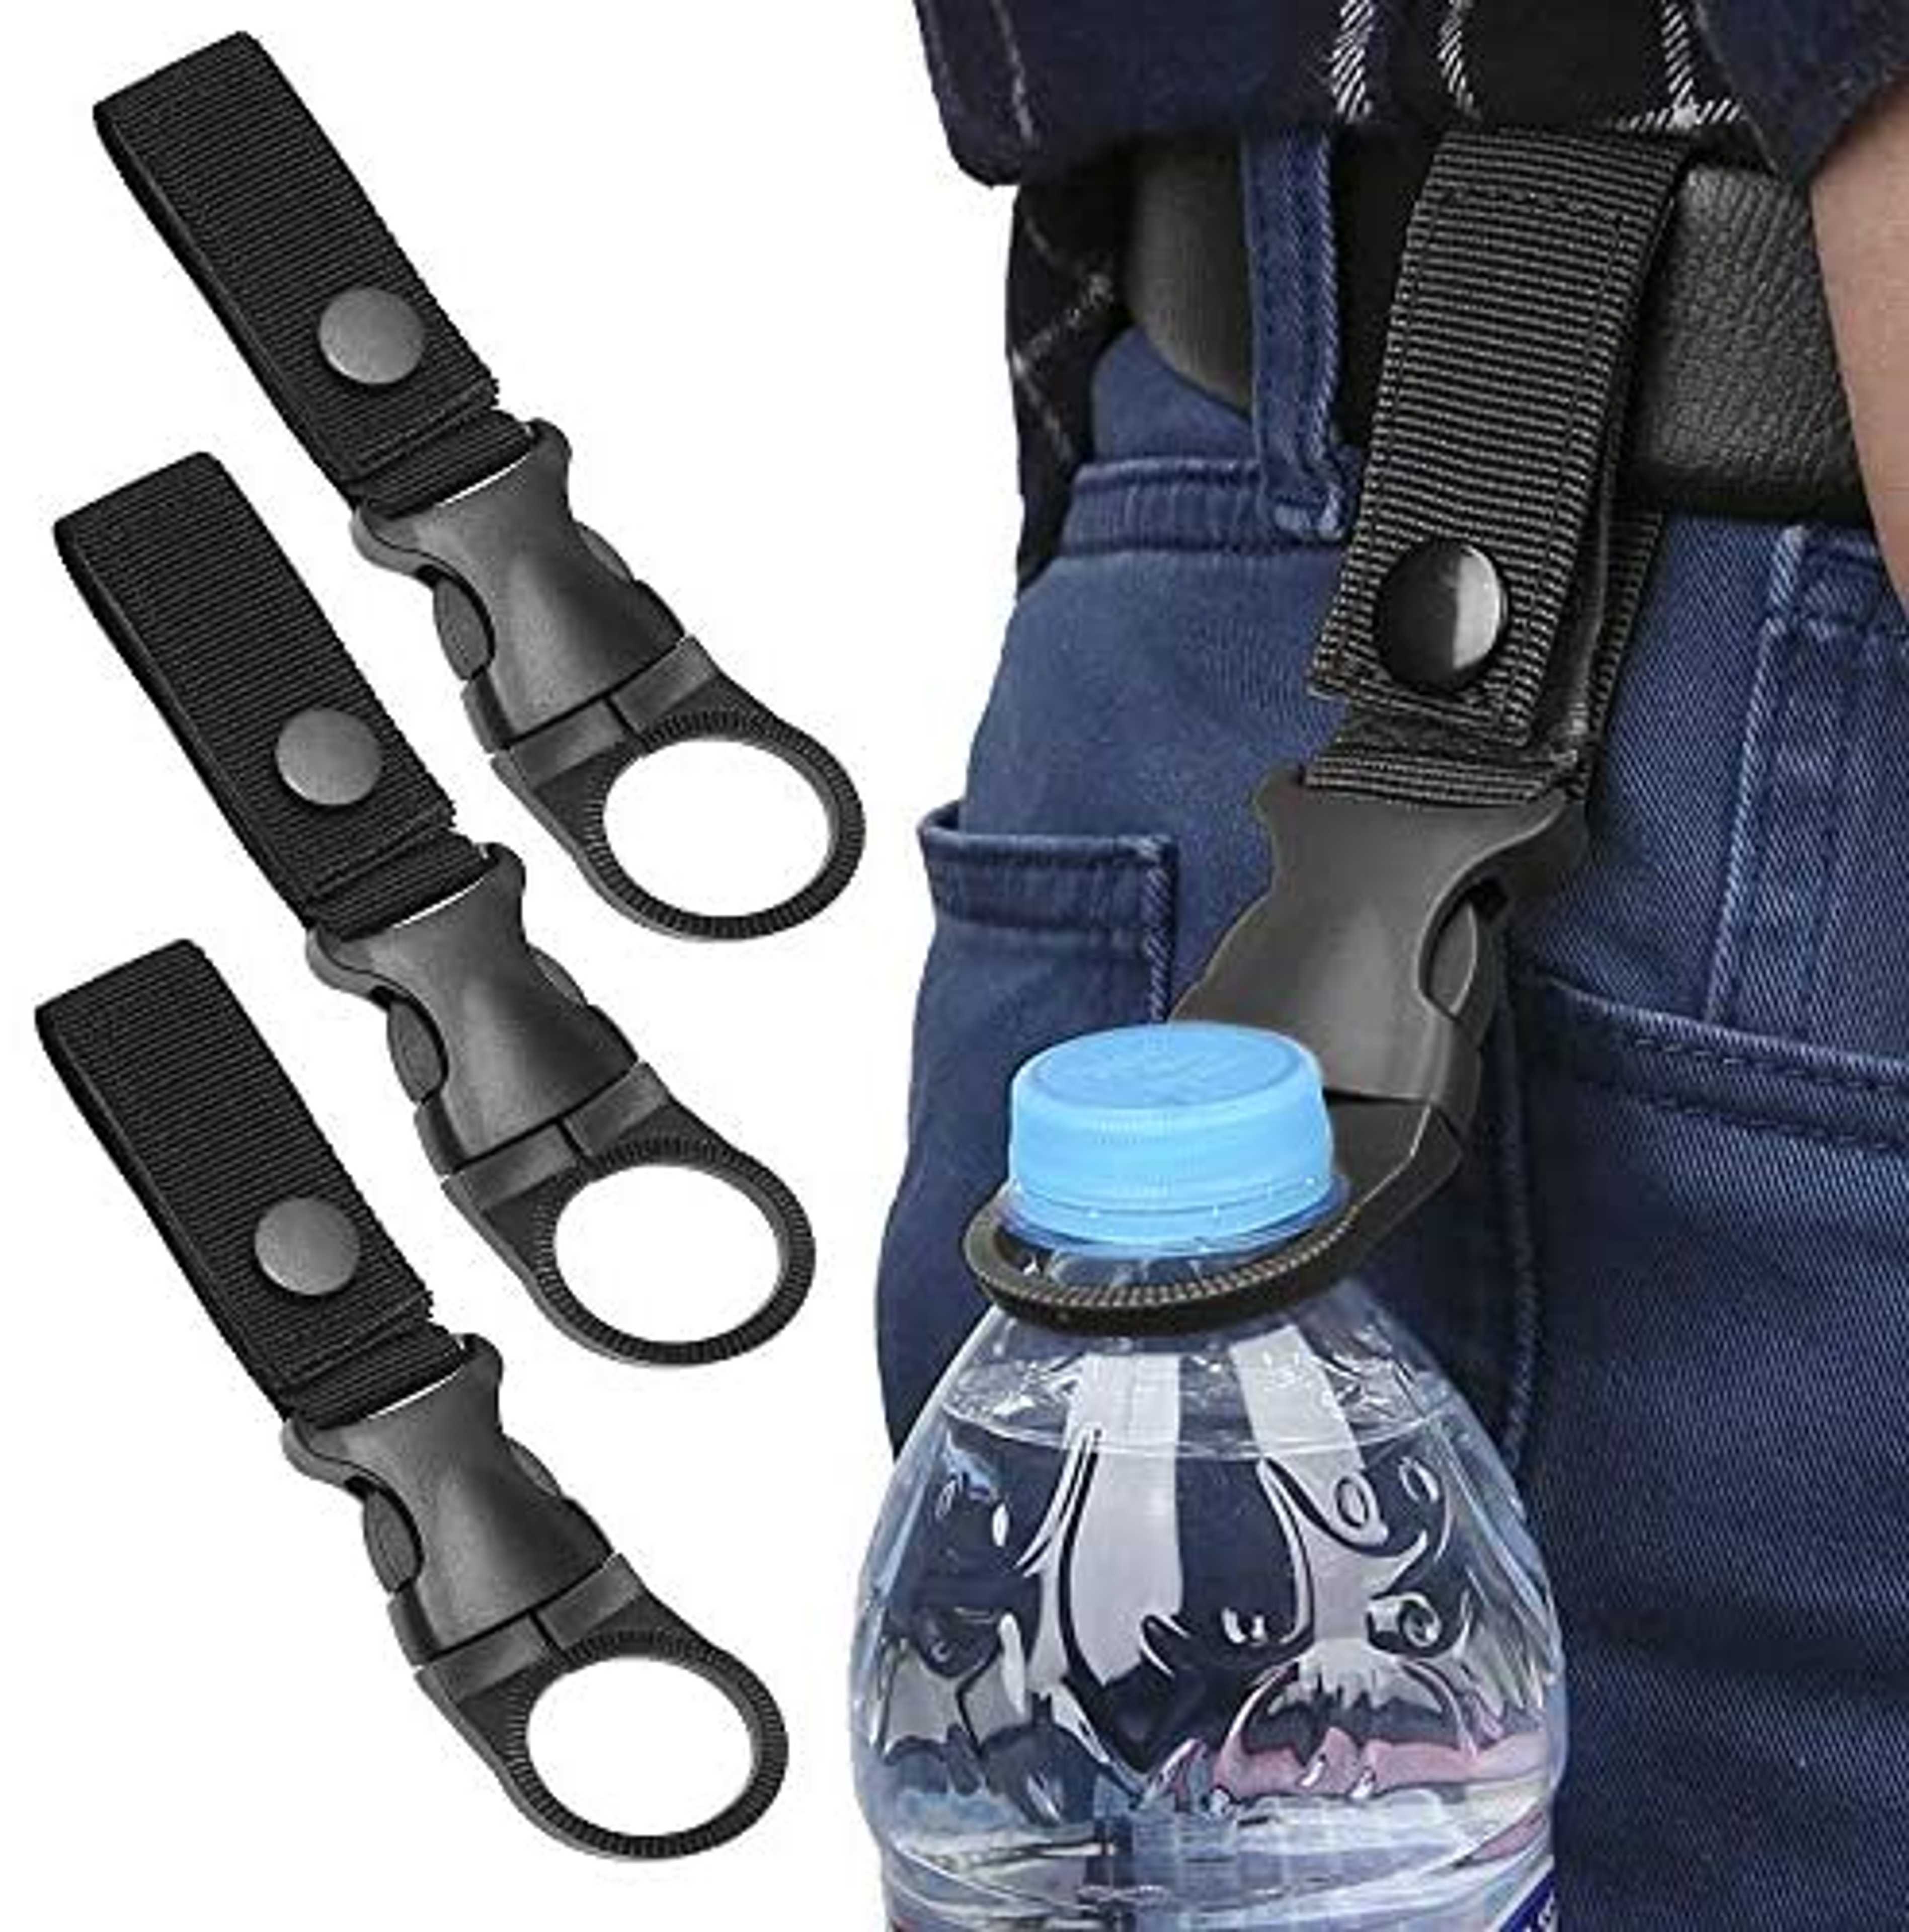 Military Water Bottle Holder Clip (1 piece only).